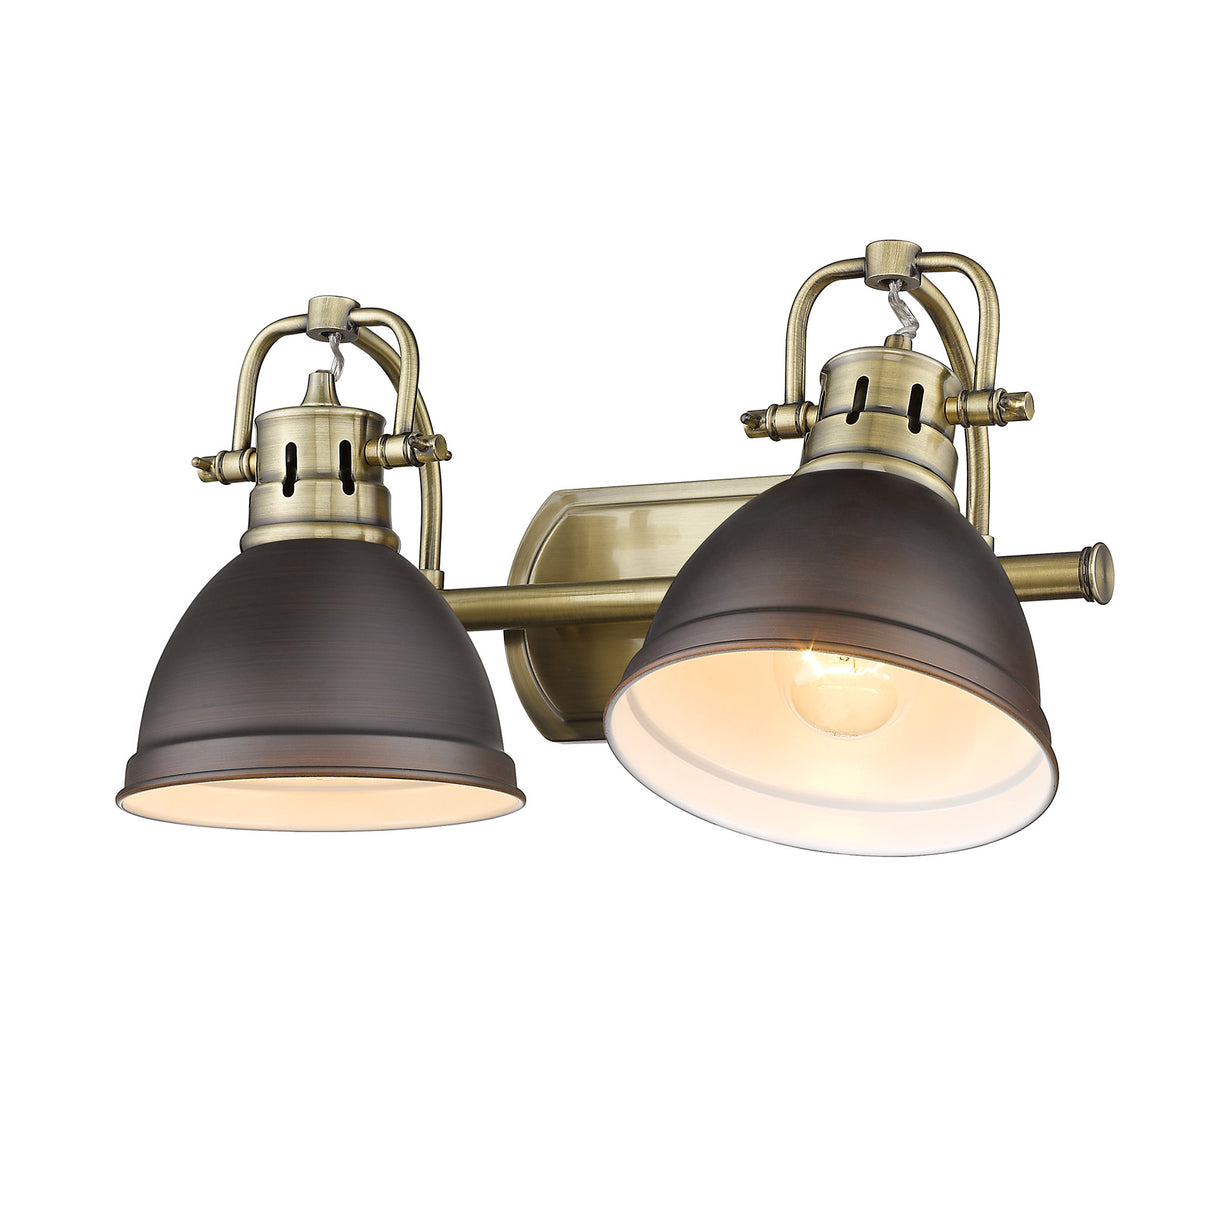 Duncan 2 Light Bath Vanity in Aged Brass with Rubbed Bronze Shades